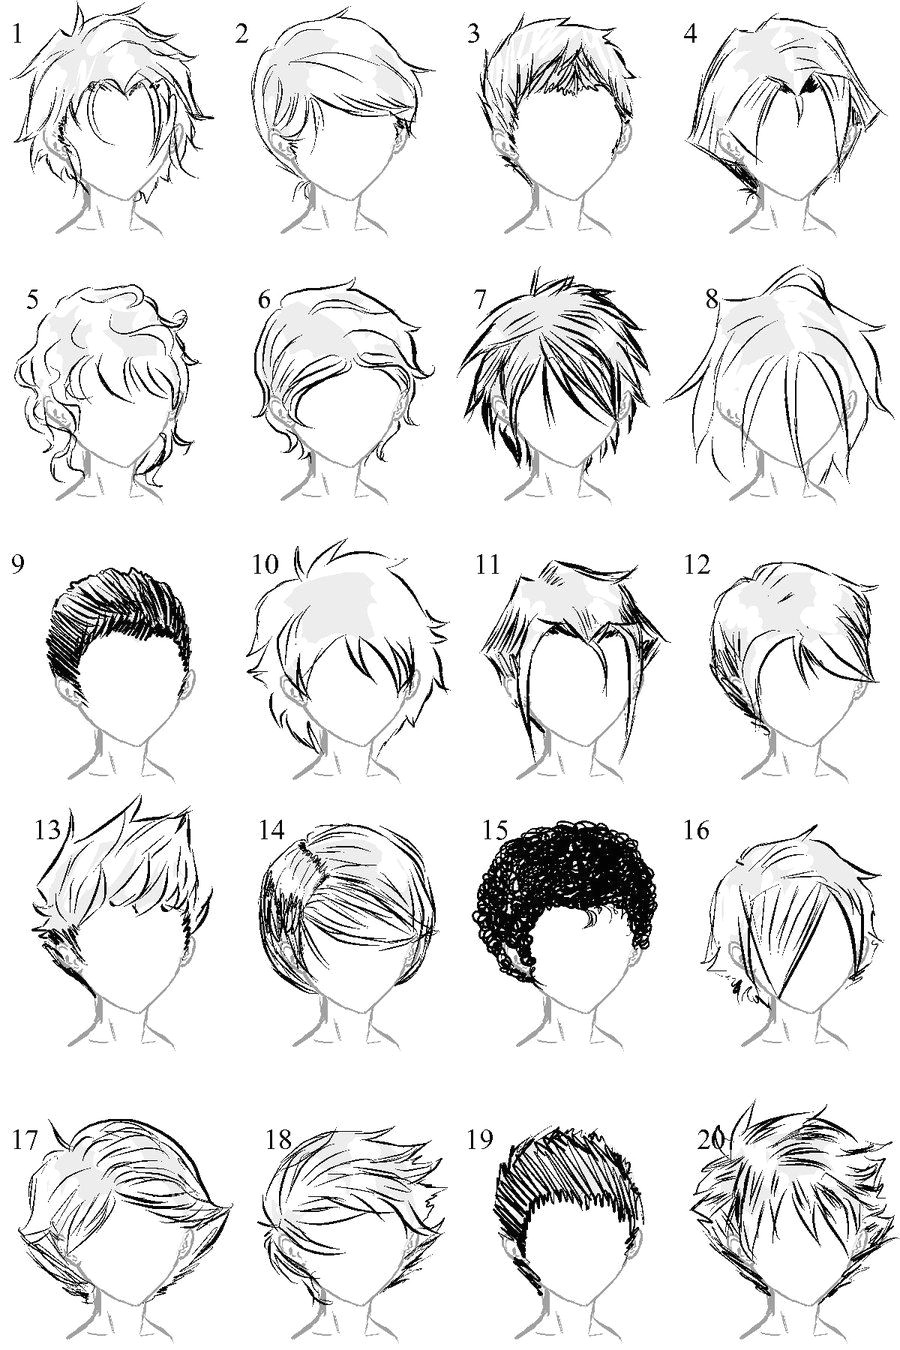 Drawings Of Boy Eyes Pin by Blondepanda On Hair Refs Draw Art Drawings How to Draw Hair